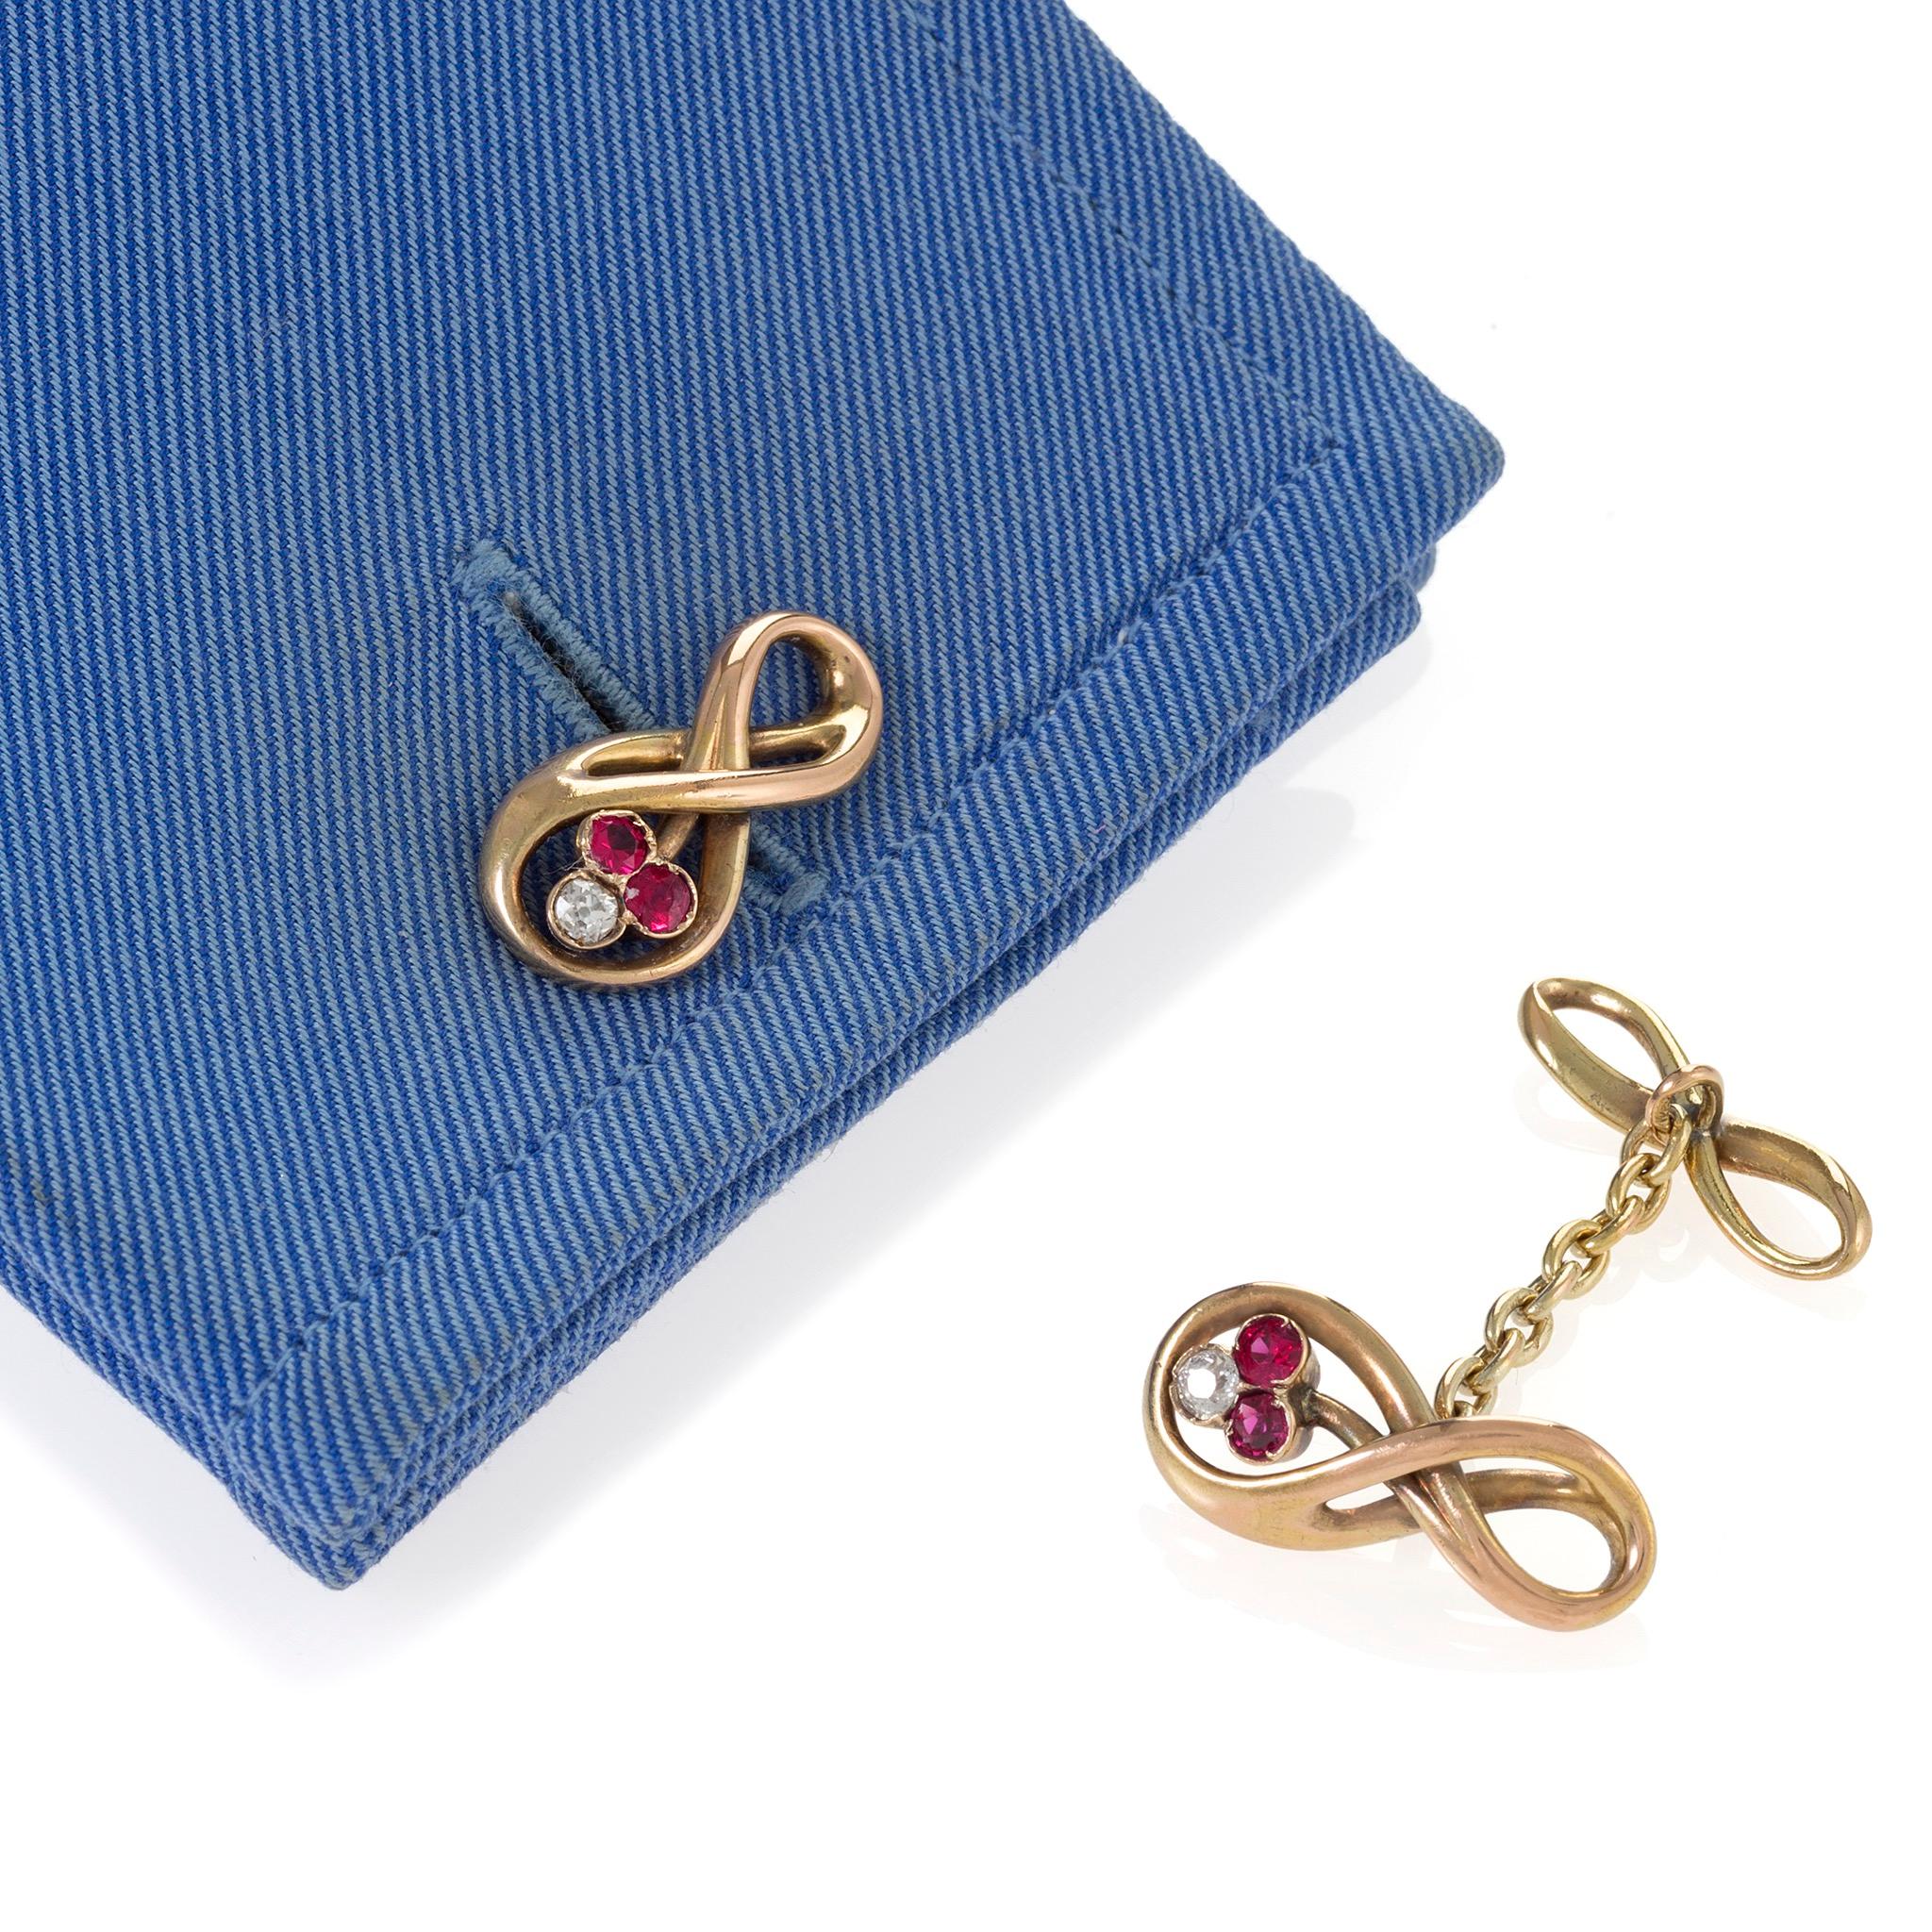 These Art Nouveau double cuff links by a Russian jeweler are designed as stylized infinity links set with diamond and ruby mêlée, joined by a line of trace link chain to smaller infinity links. Designed by a free and exuberant hand, these unusual